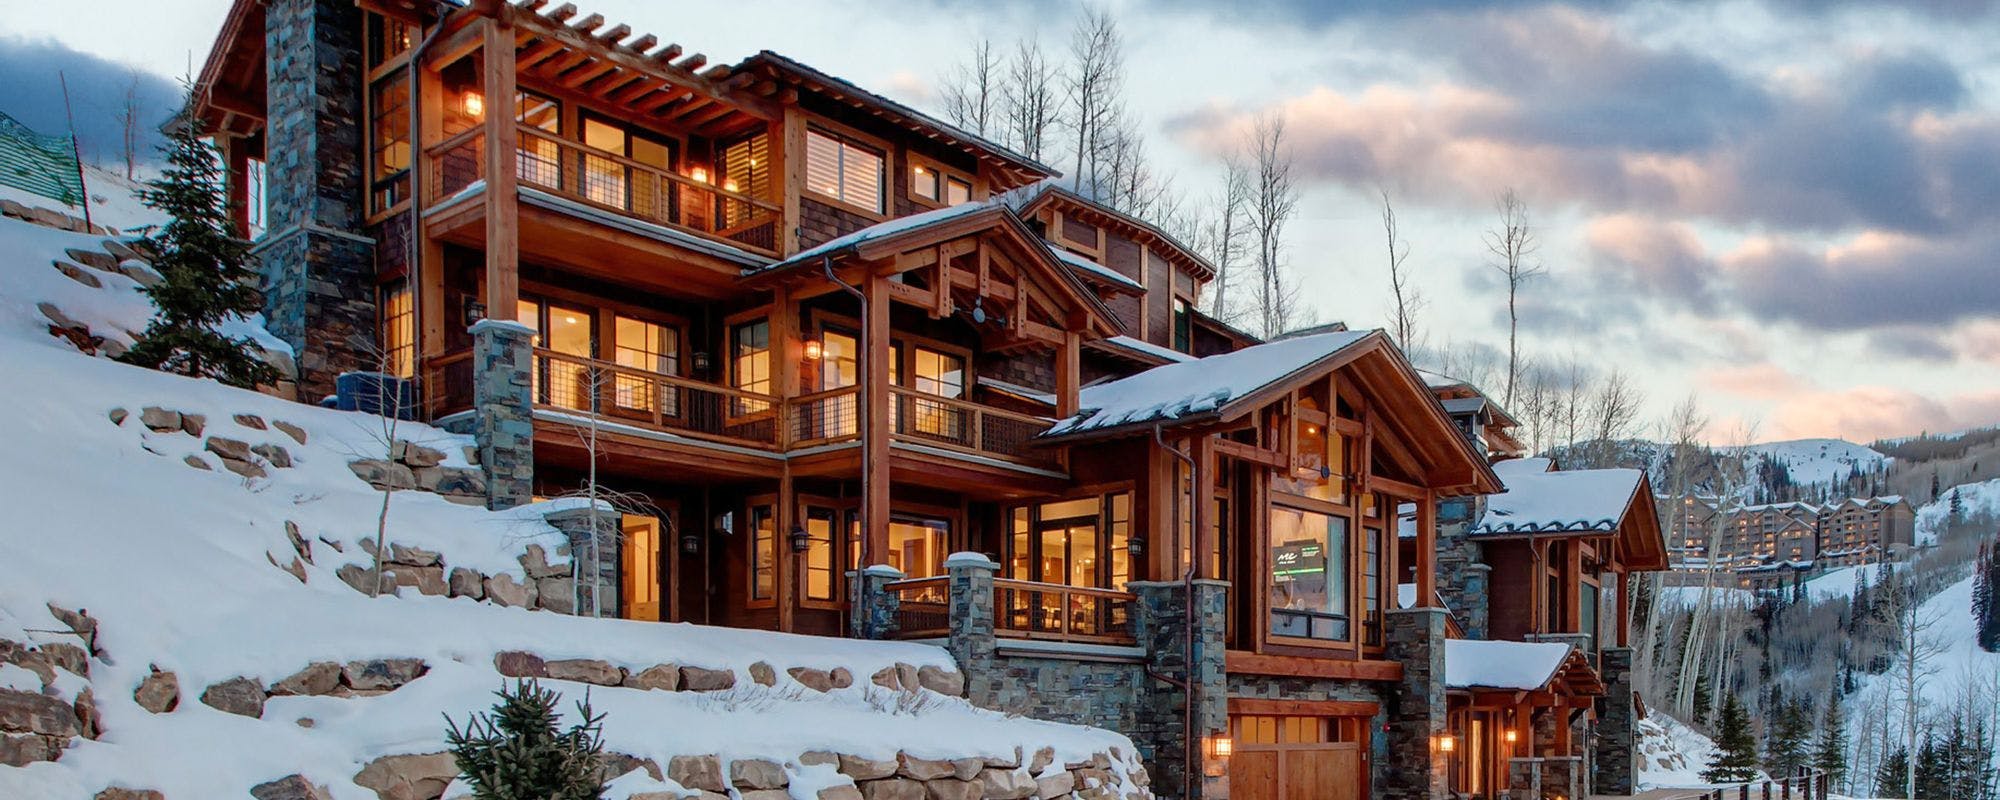 Snowy exterior of a Park City vacation rental.